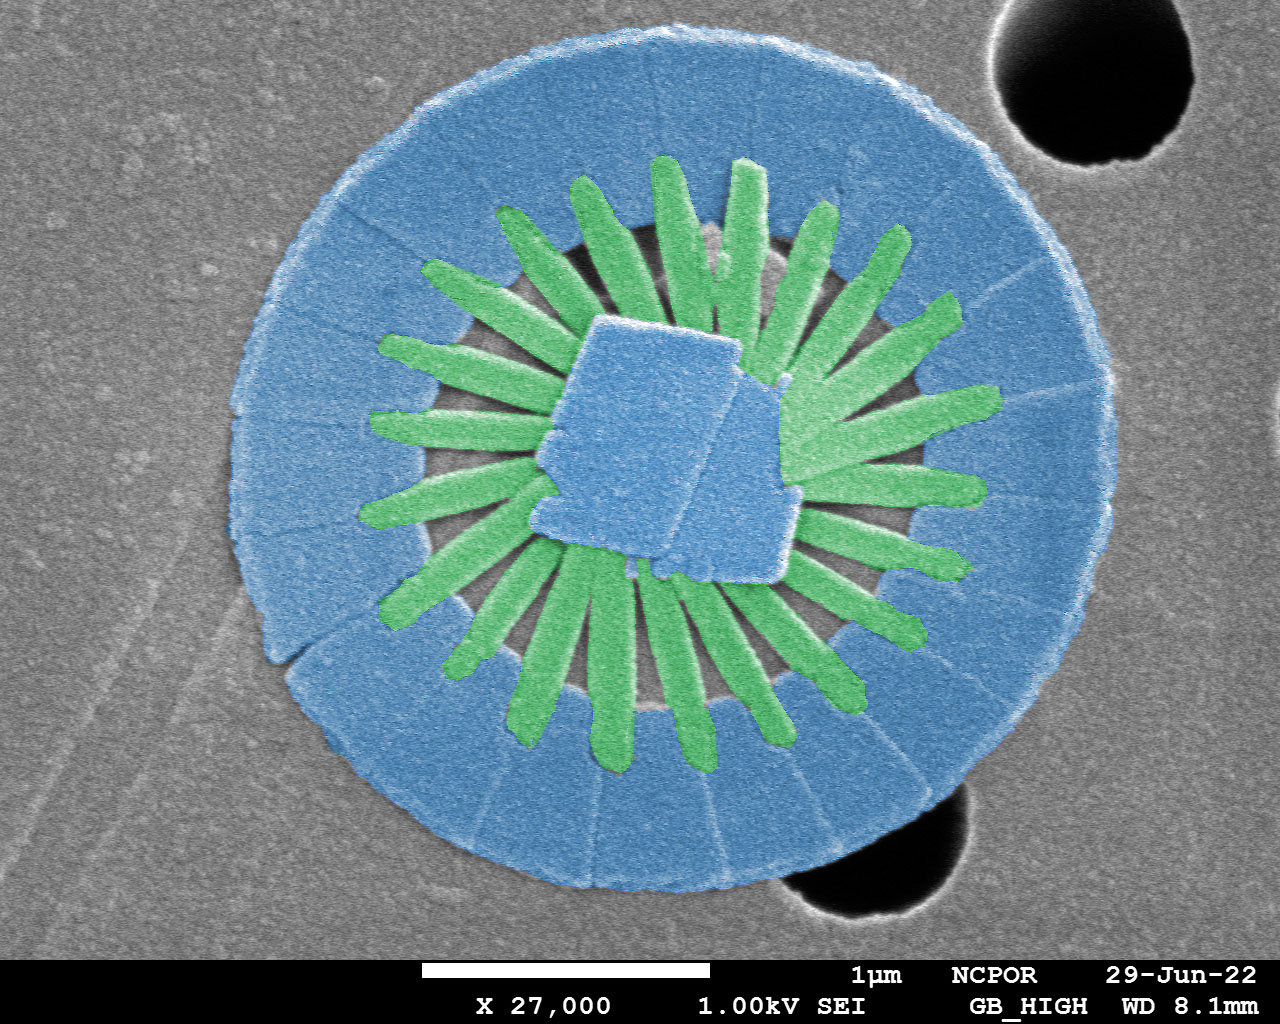 TITLE: Plankton Wheel; SUBJECT: A calcareous nanoplankton from the Southern Indian Ocean; CREDIT: Sahina Gazi, National Centre for Polar and Ocean Research (NCPOR), Goa; METHOD/INSTRUMENT: JEOL JSM-7610F FESEM